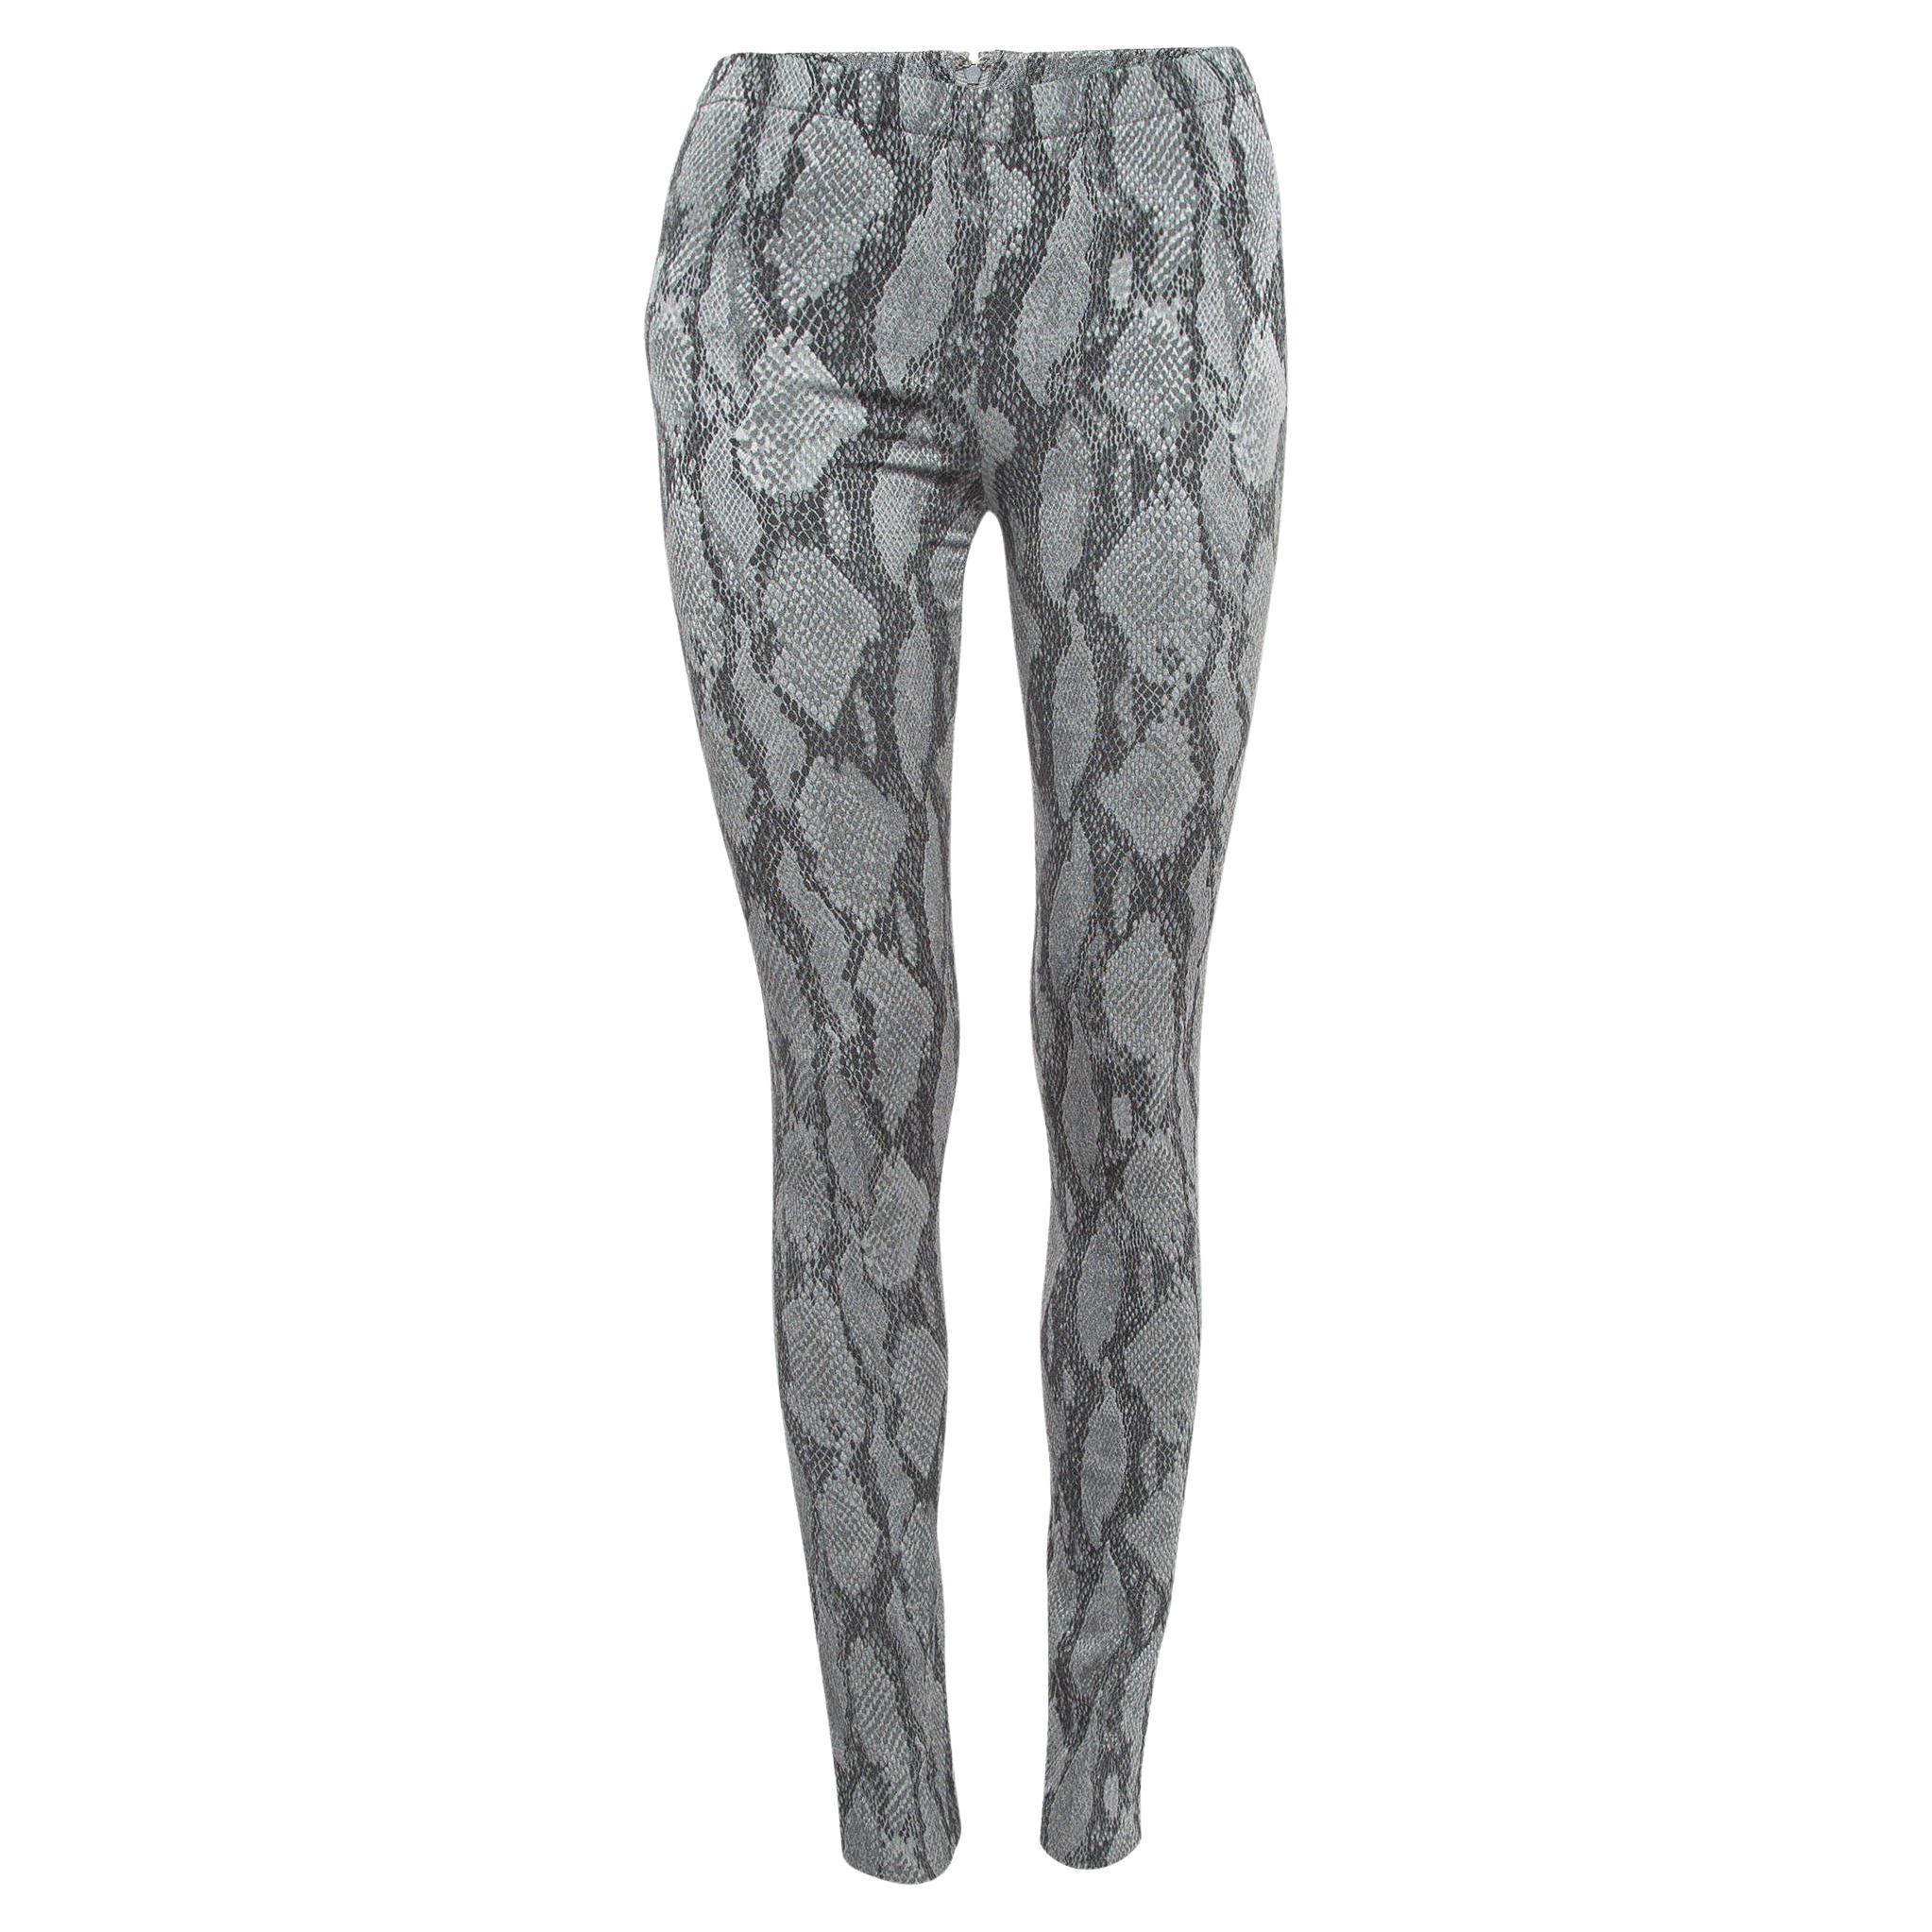 Zadig & Voltaire Grey Snake Printed Textured Knit Leggings M For Sale